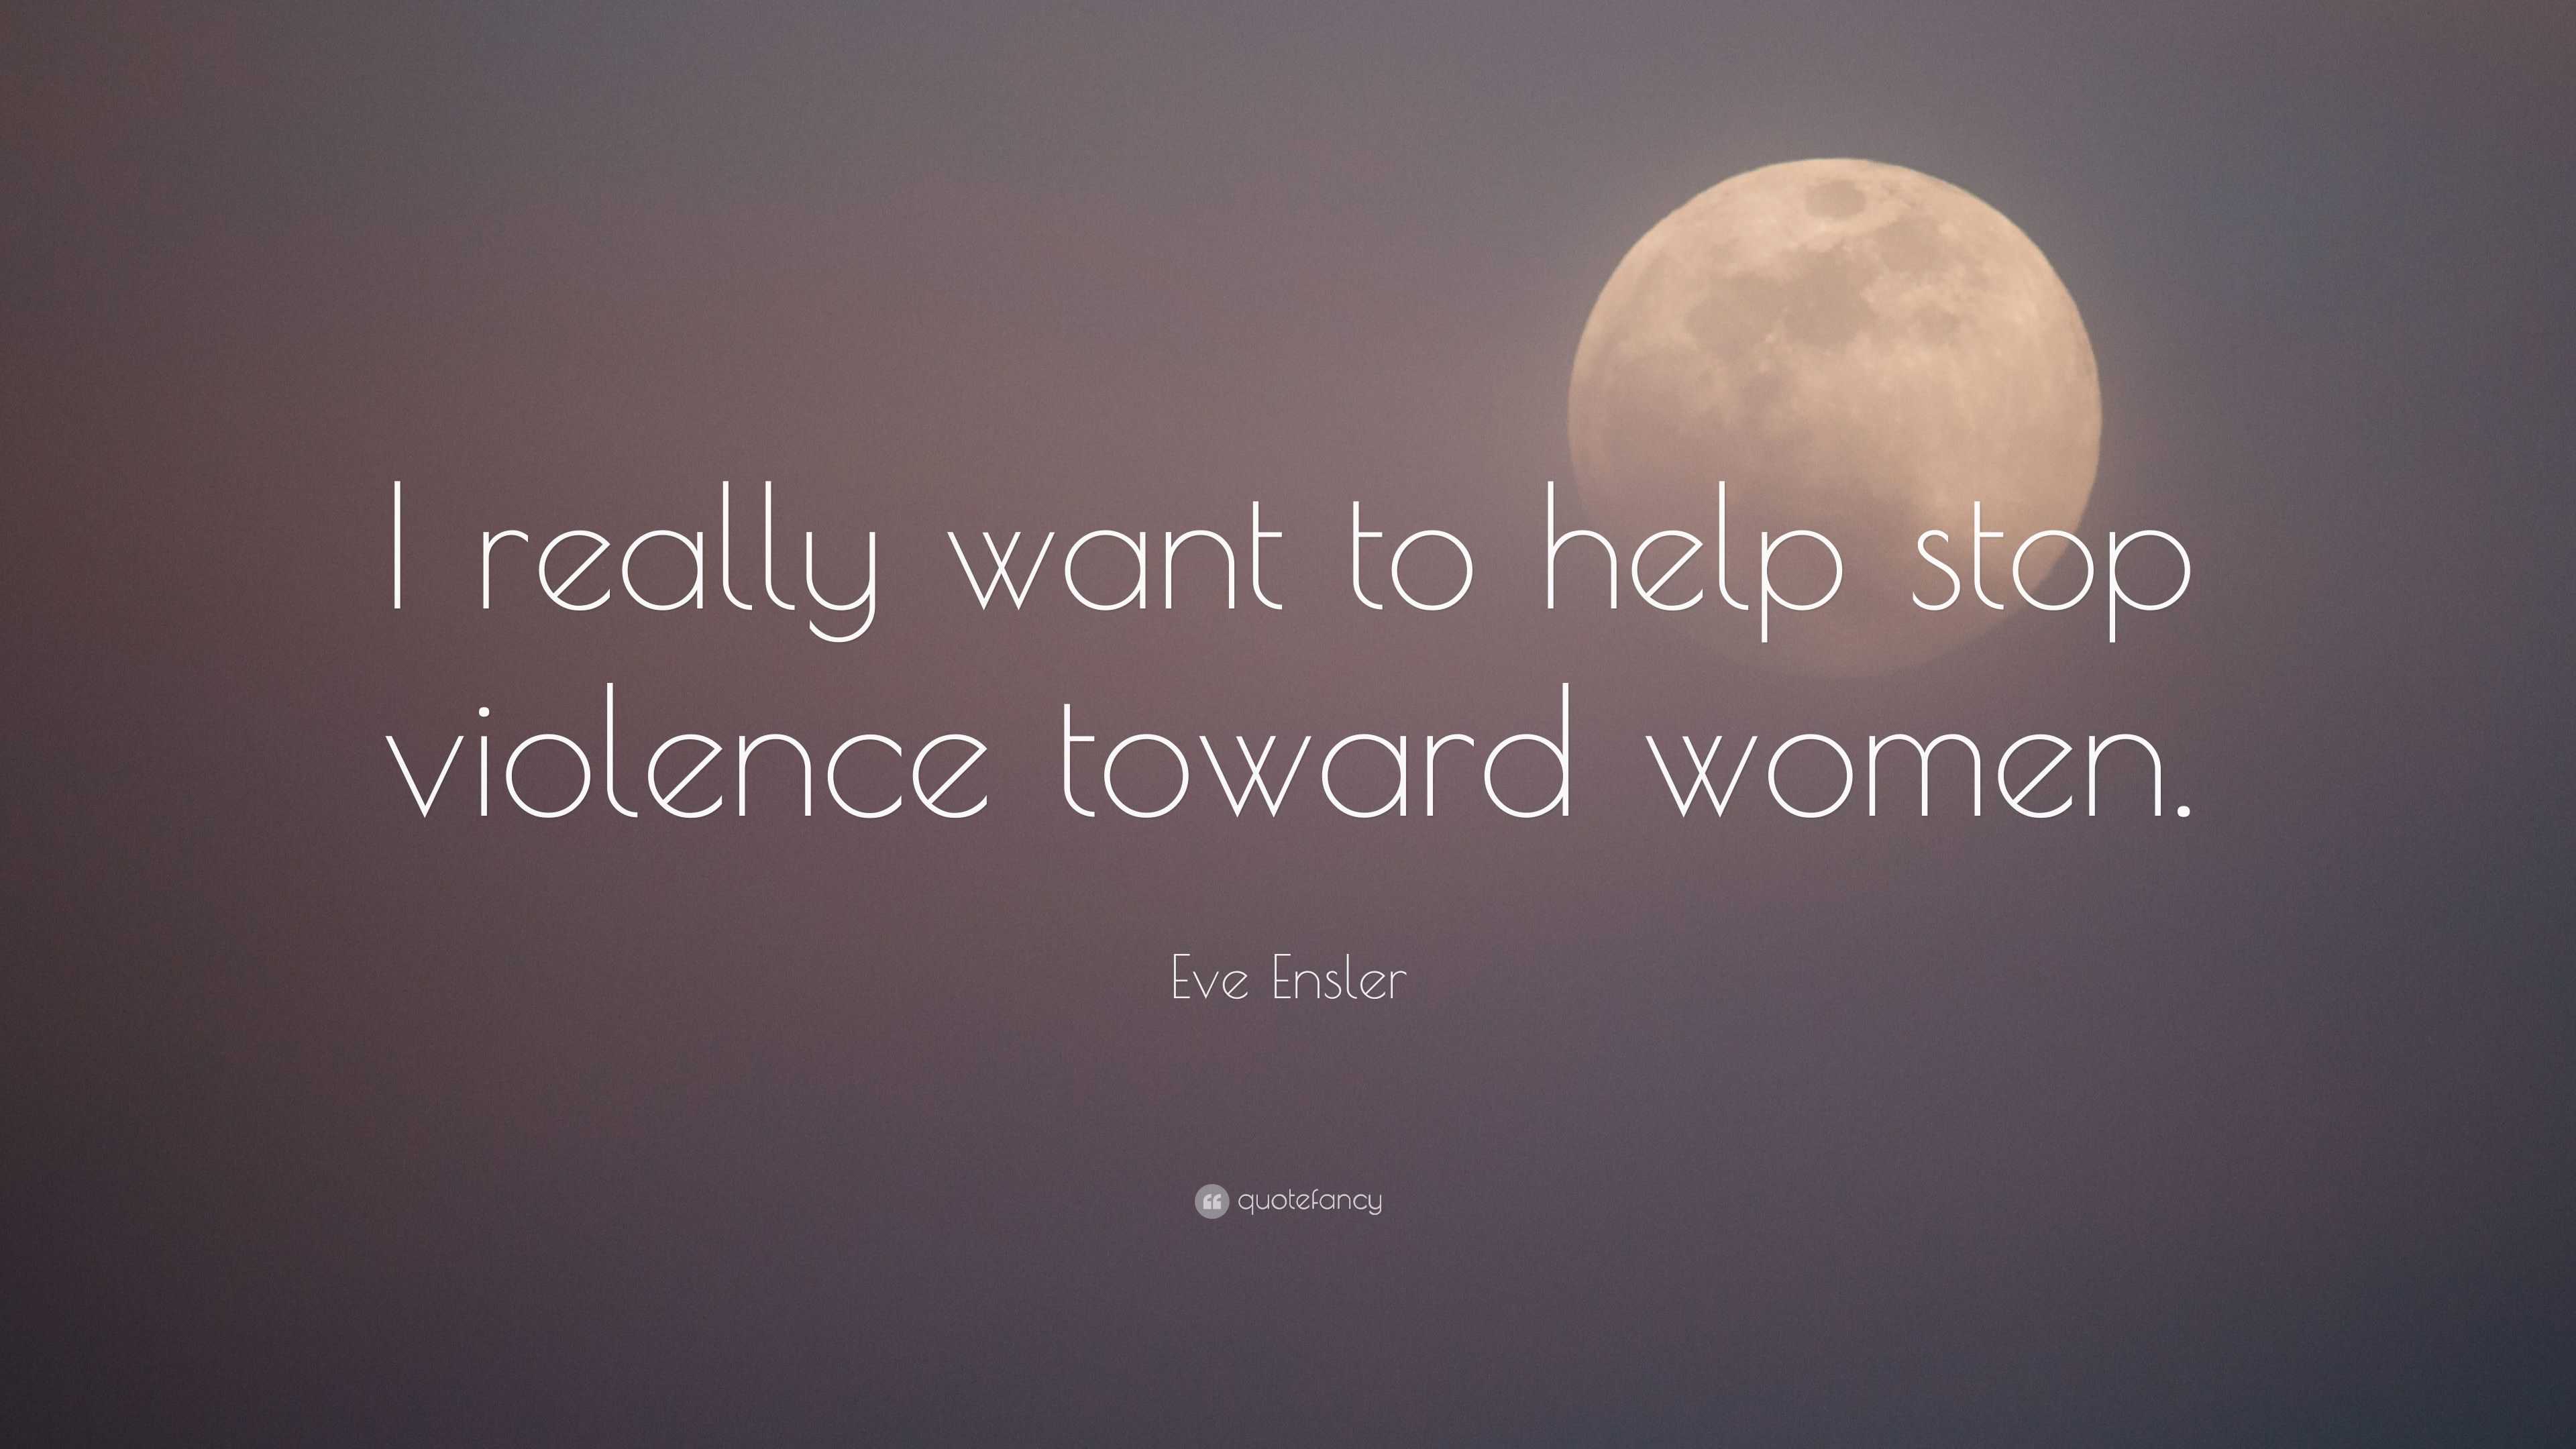 Eve Ensler Quote “i Really Want To Help Stop Violence Toward Women” 